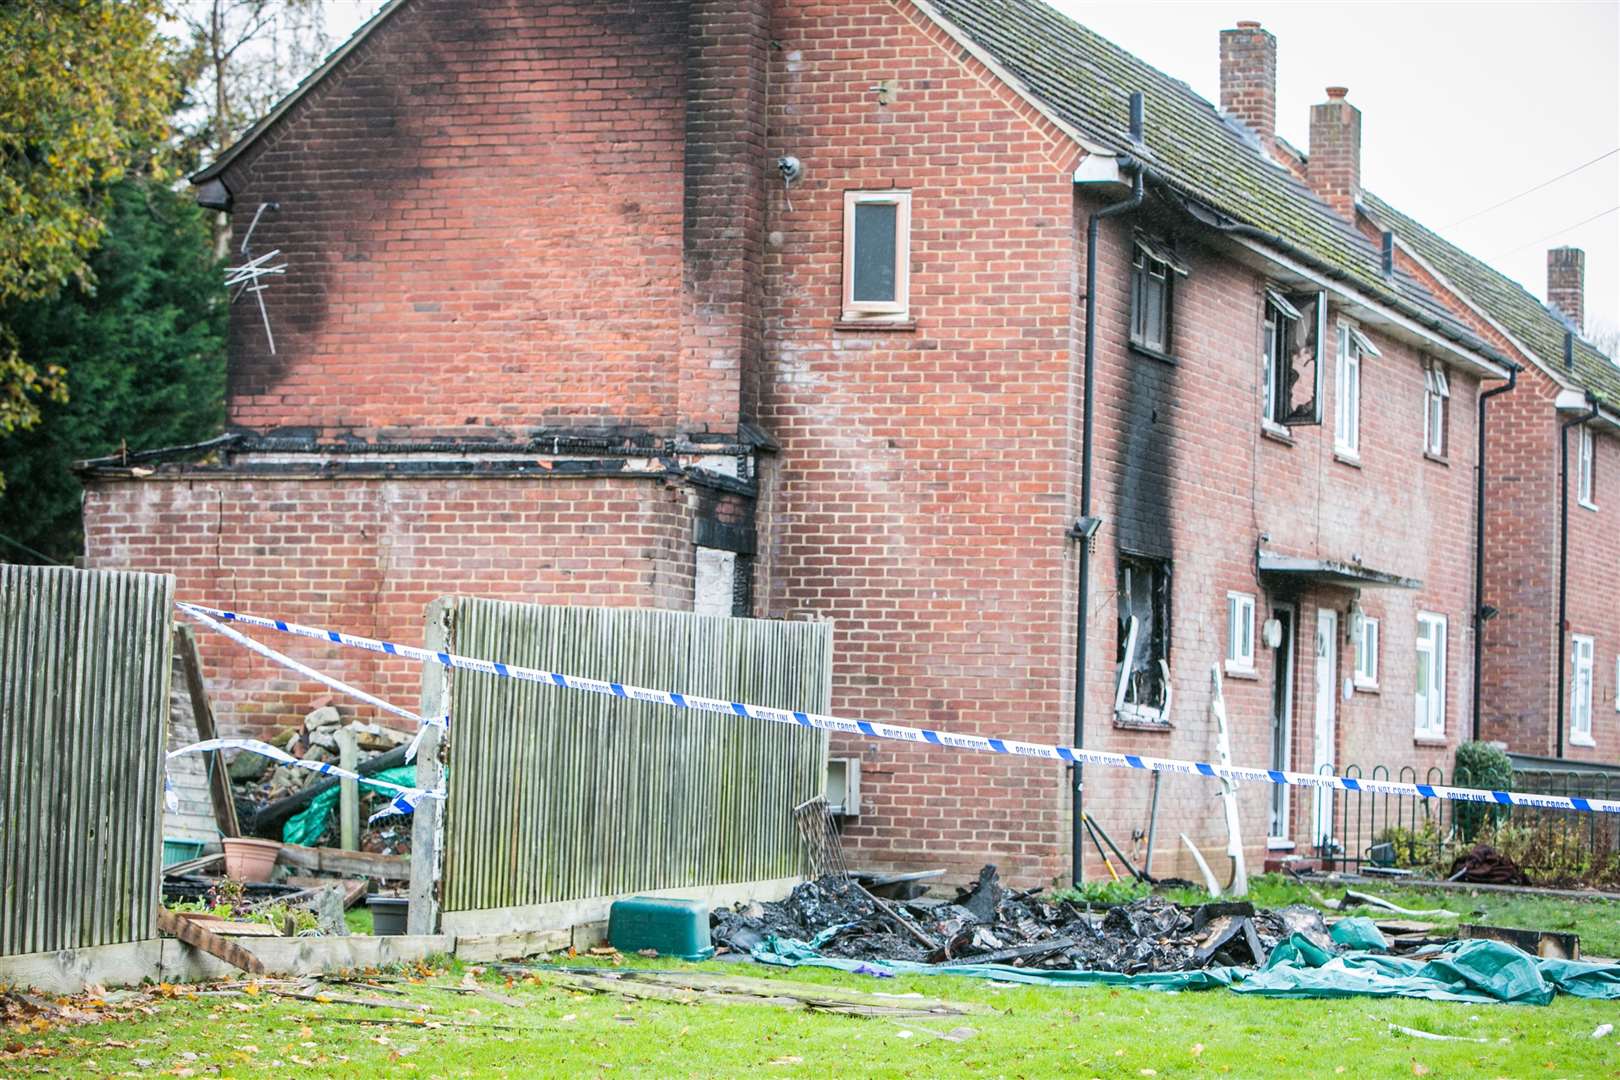 The scene of the house fire in Spitfire Road, West Malling, where Jackie Allen died. Picture: Matthew Walker